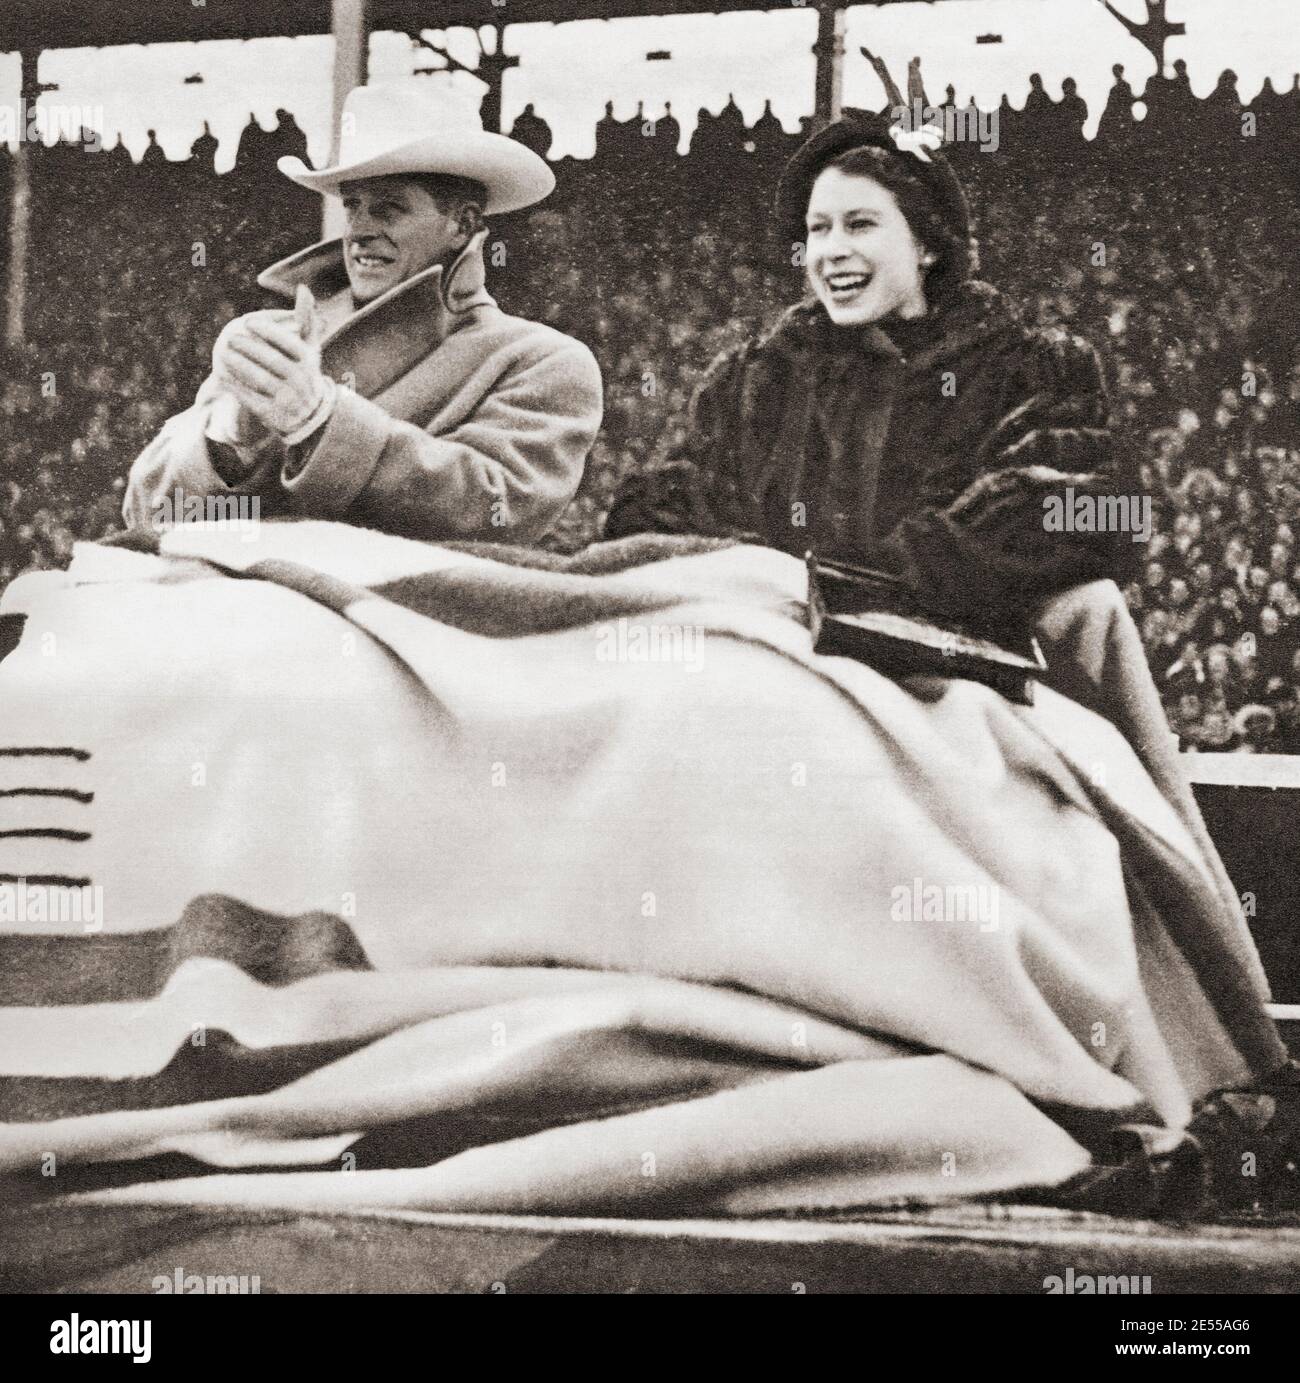 EDITORIAL ONLY Princess Elizabeth and the Duke of Edinburgh, seen here during their tour of Canada in 1951. Princess Elizabeth of York,1926 - 2022, future Elizabeth II, Queen of the United Kingdom.  Prince Philip, Duke of Edinburgh, born Prince Philip of Greece and Denmark,1921- 2021. Husband of Queen Elizabeth II of the United Kingdom. From The Queen Elizabeth Coronation Book, published 1953. Stock Photo